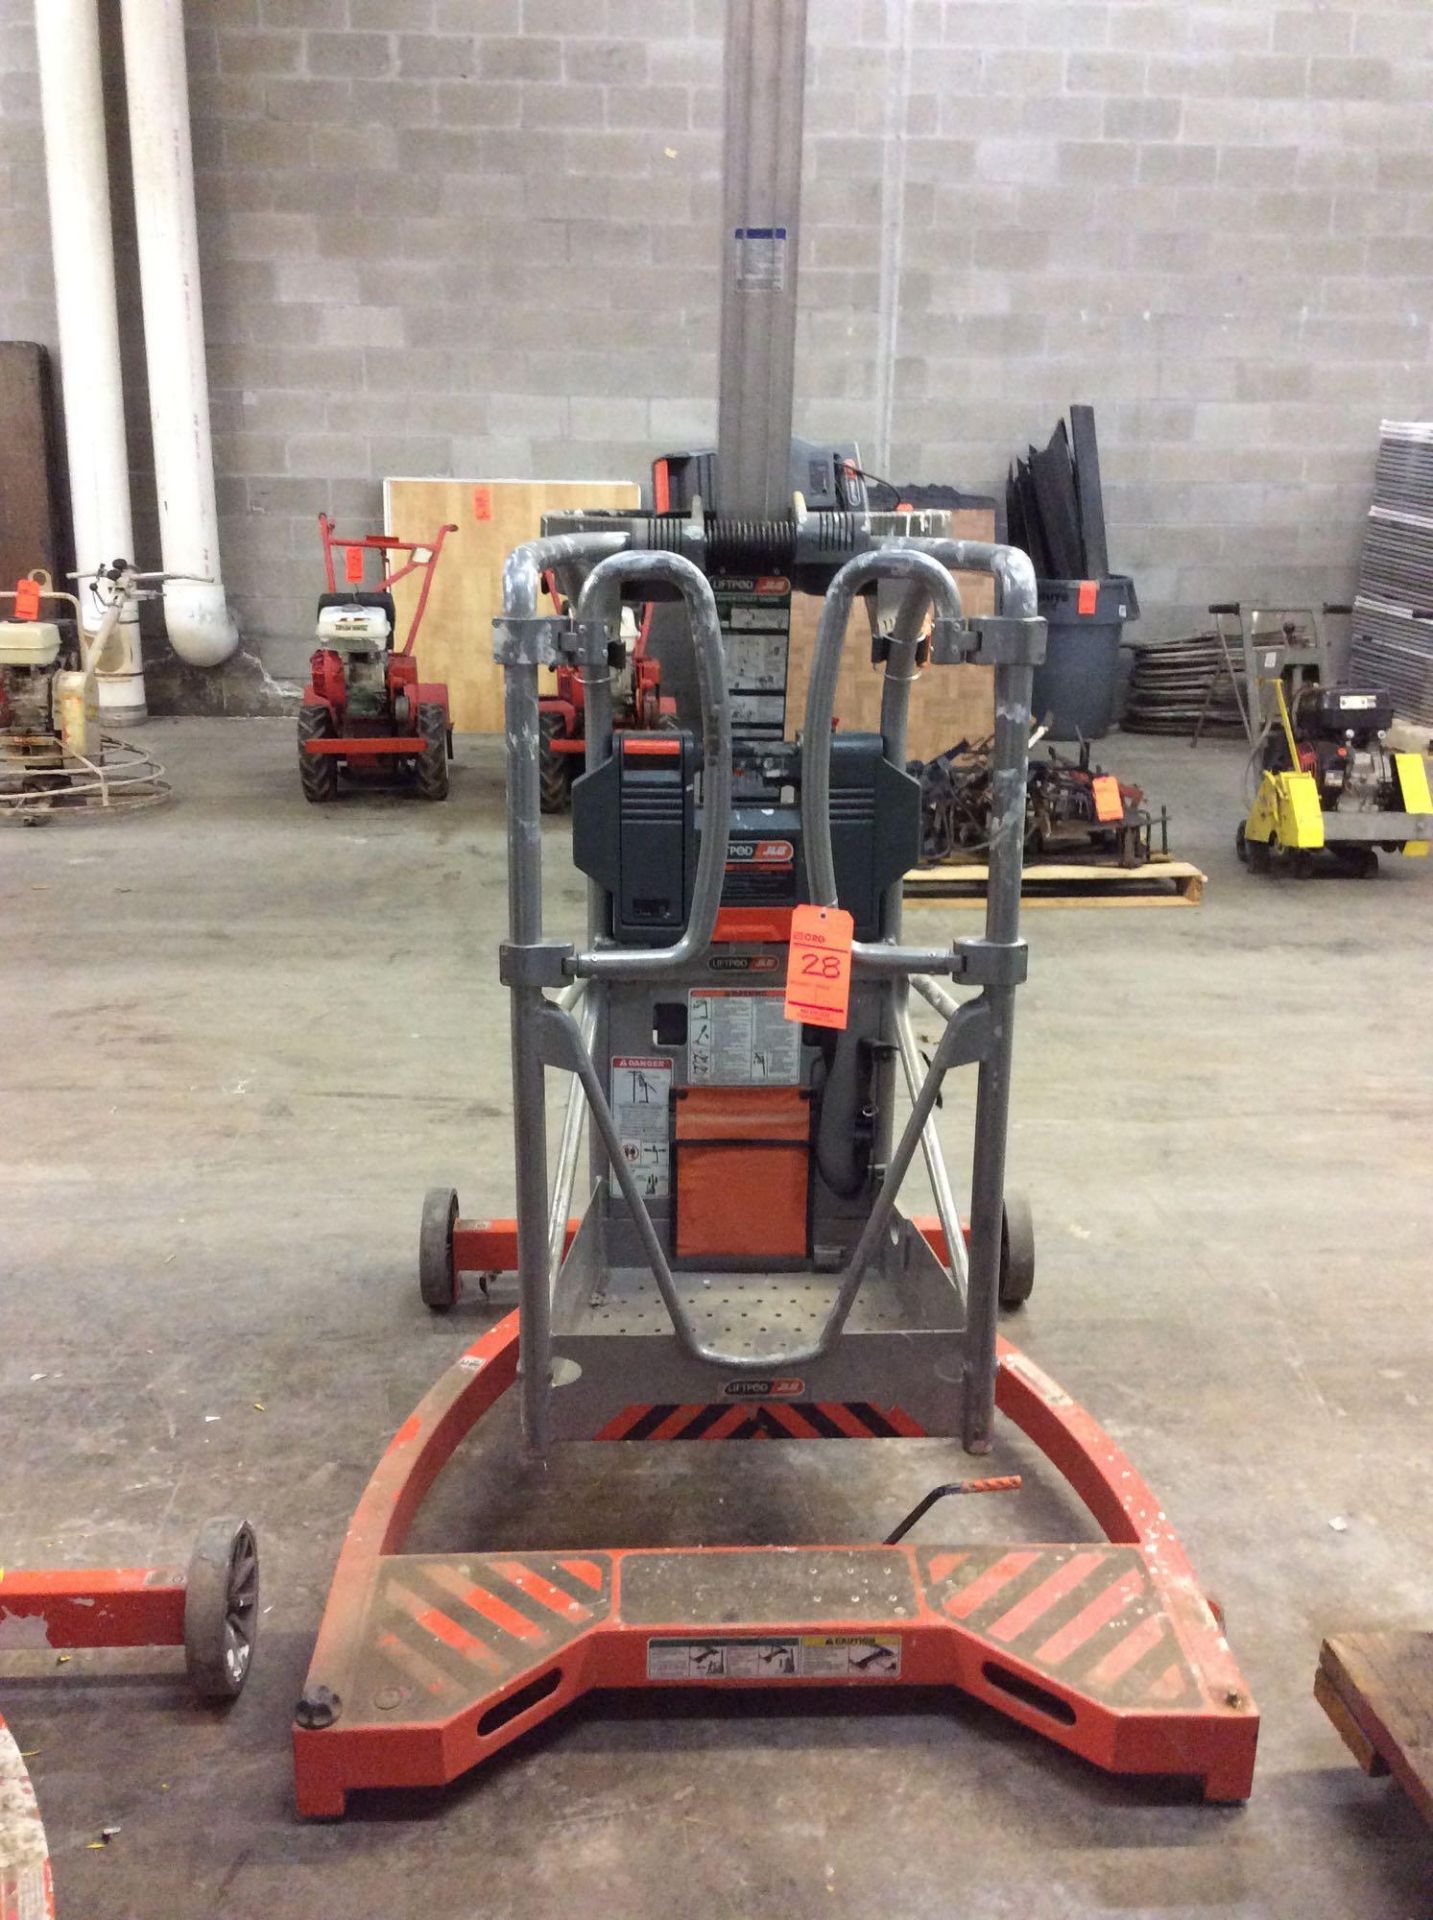 JLG Liftpod m/n FS80 electric manlift w/charger - Image 2 of 2